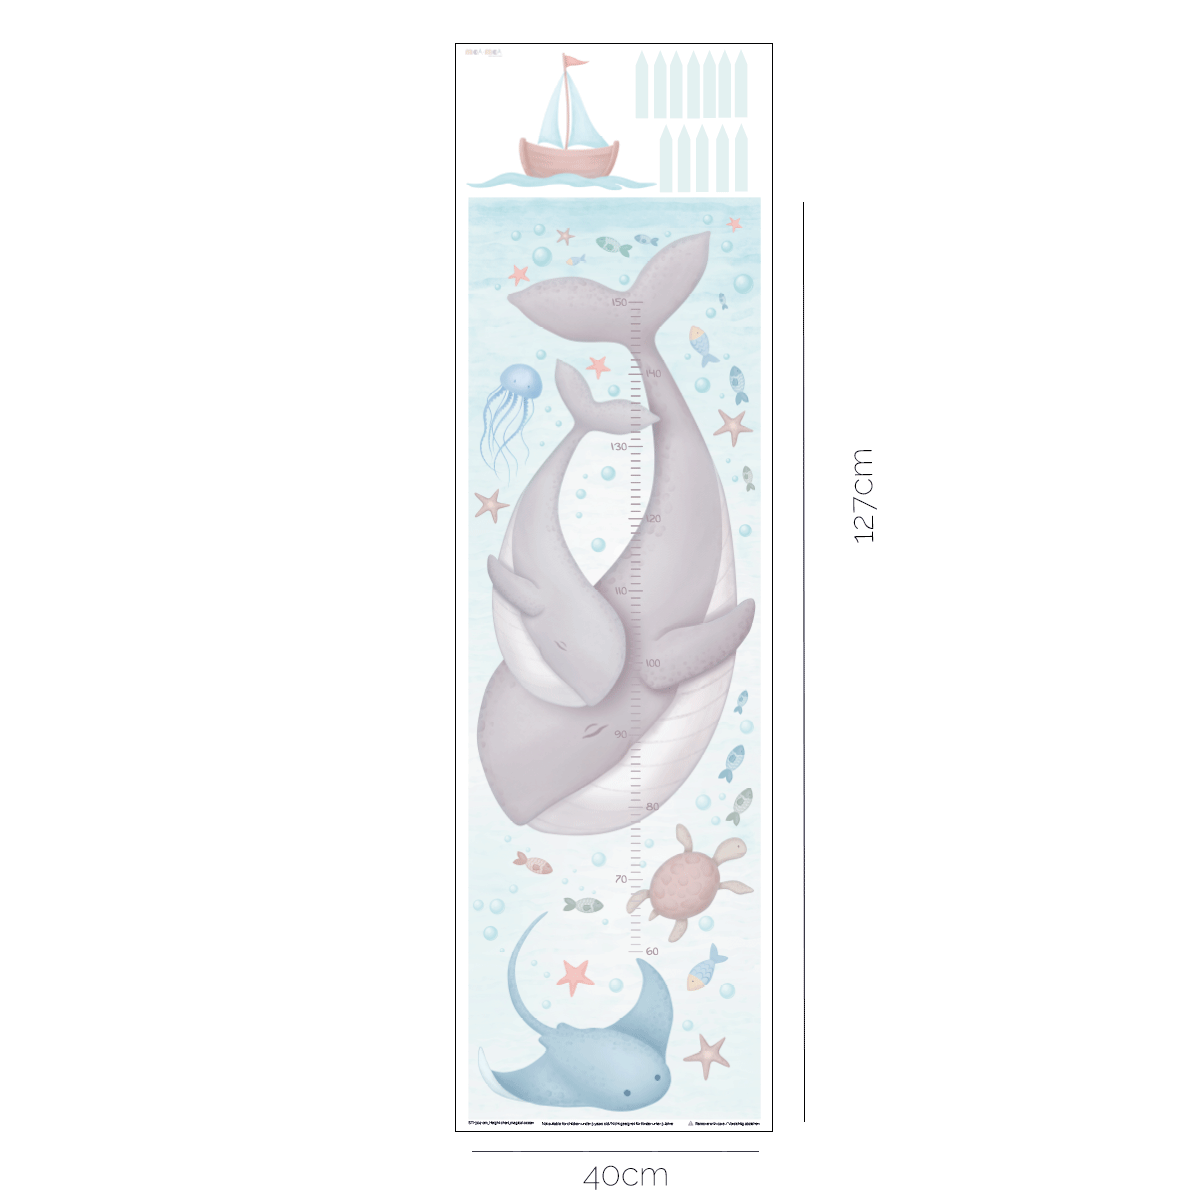 Height chart wall stickers - Magical ocean growth chart